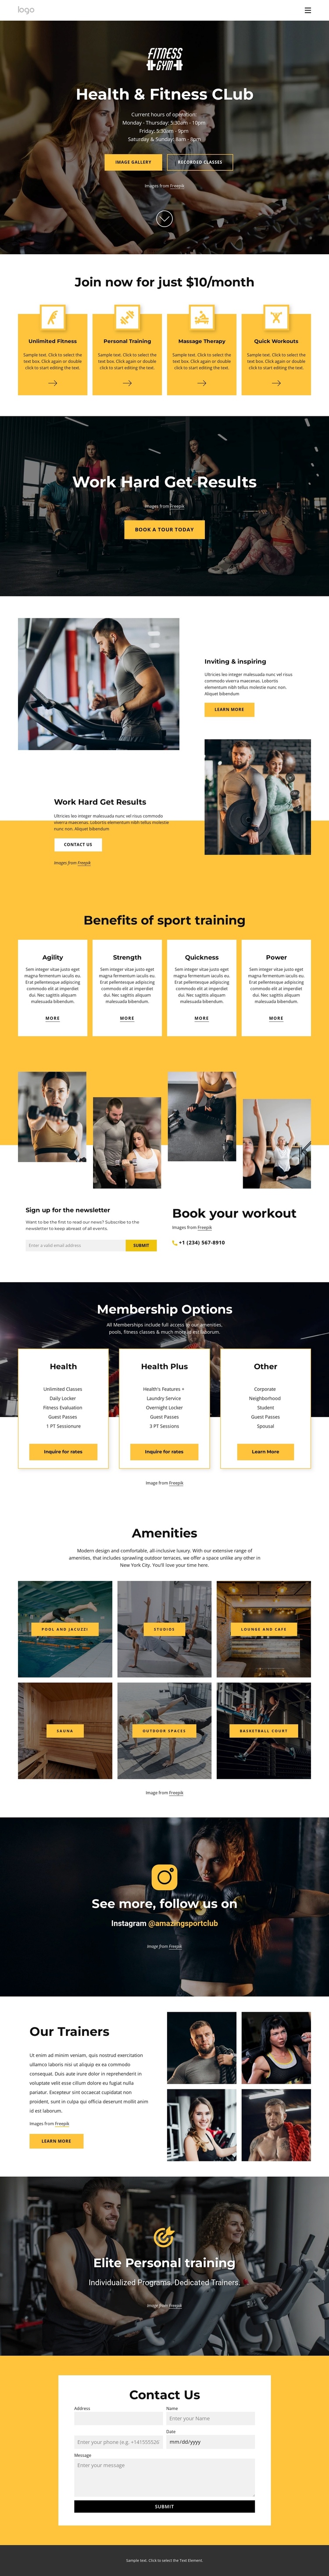 Health and fitness club Website Builder Software